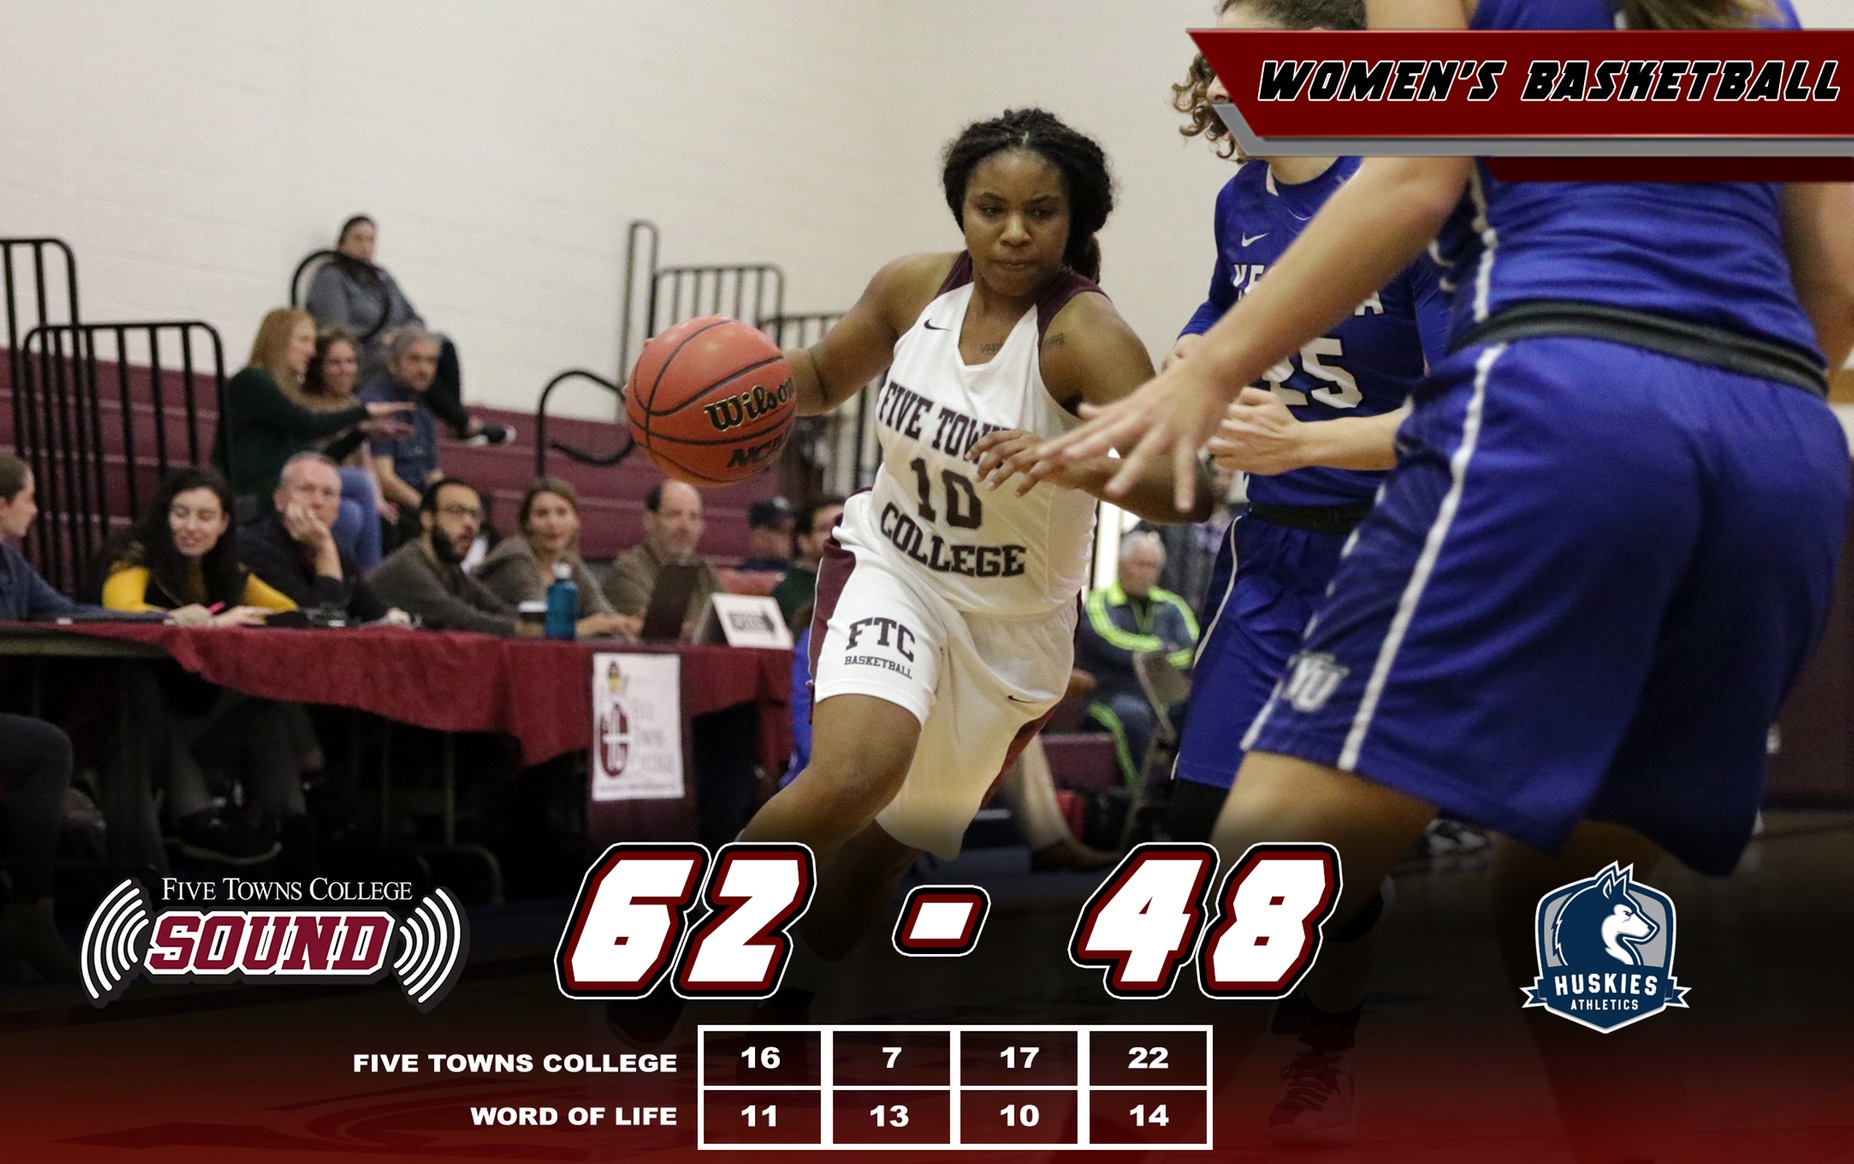 Women's Basketball: Five Towns 64, Word of Life 48